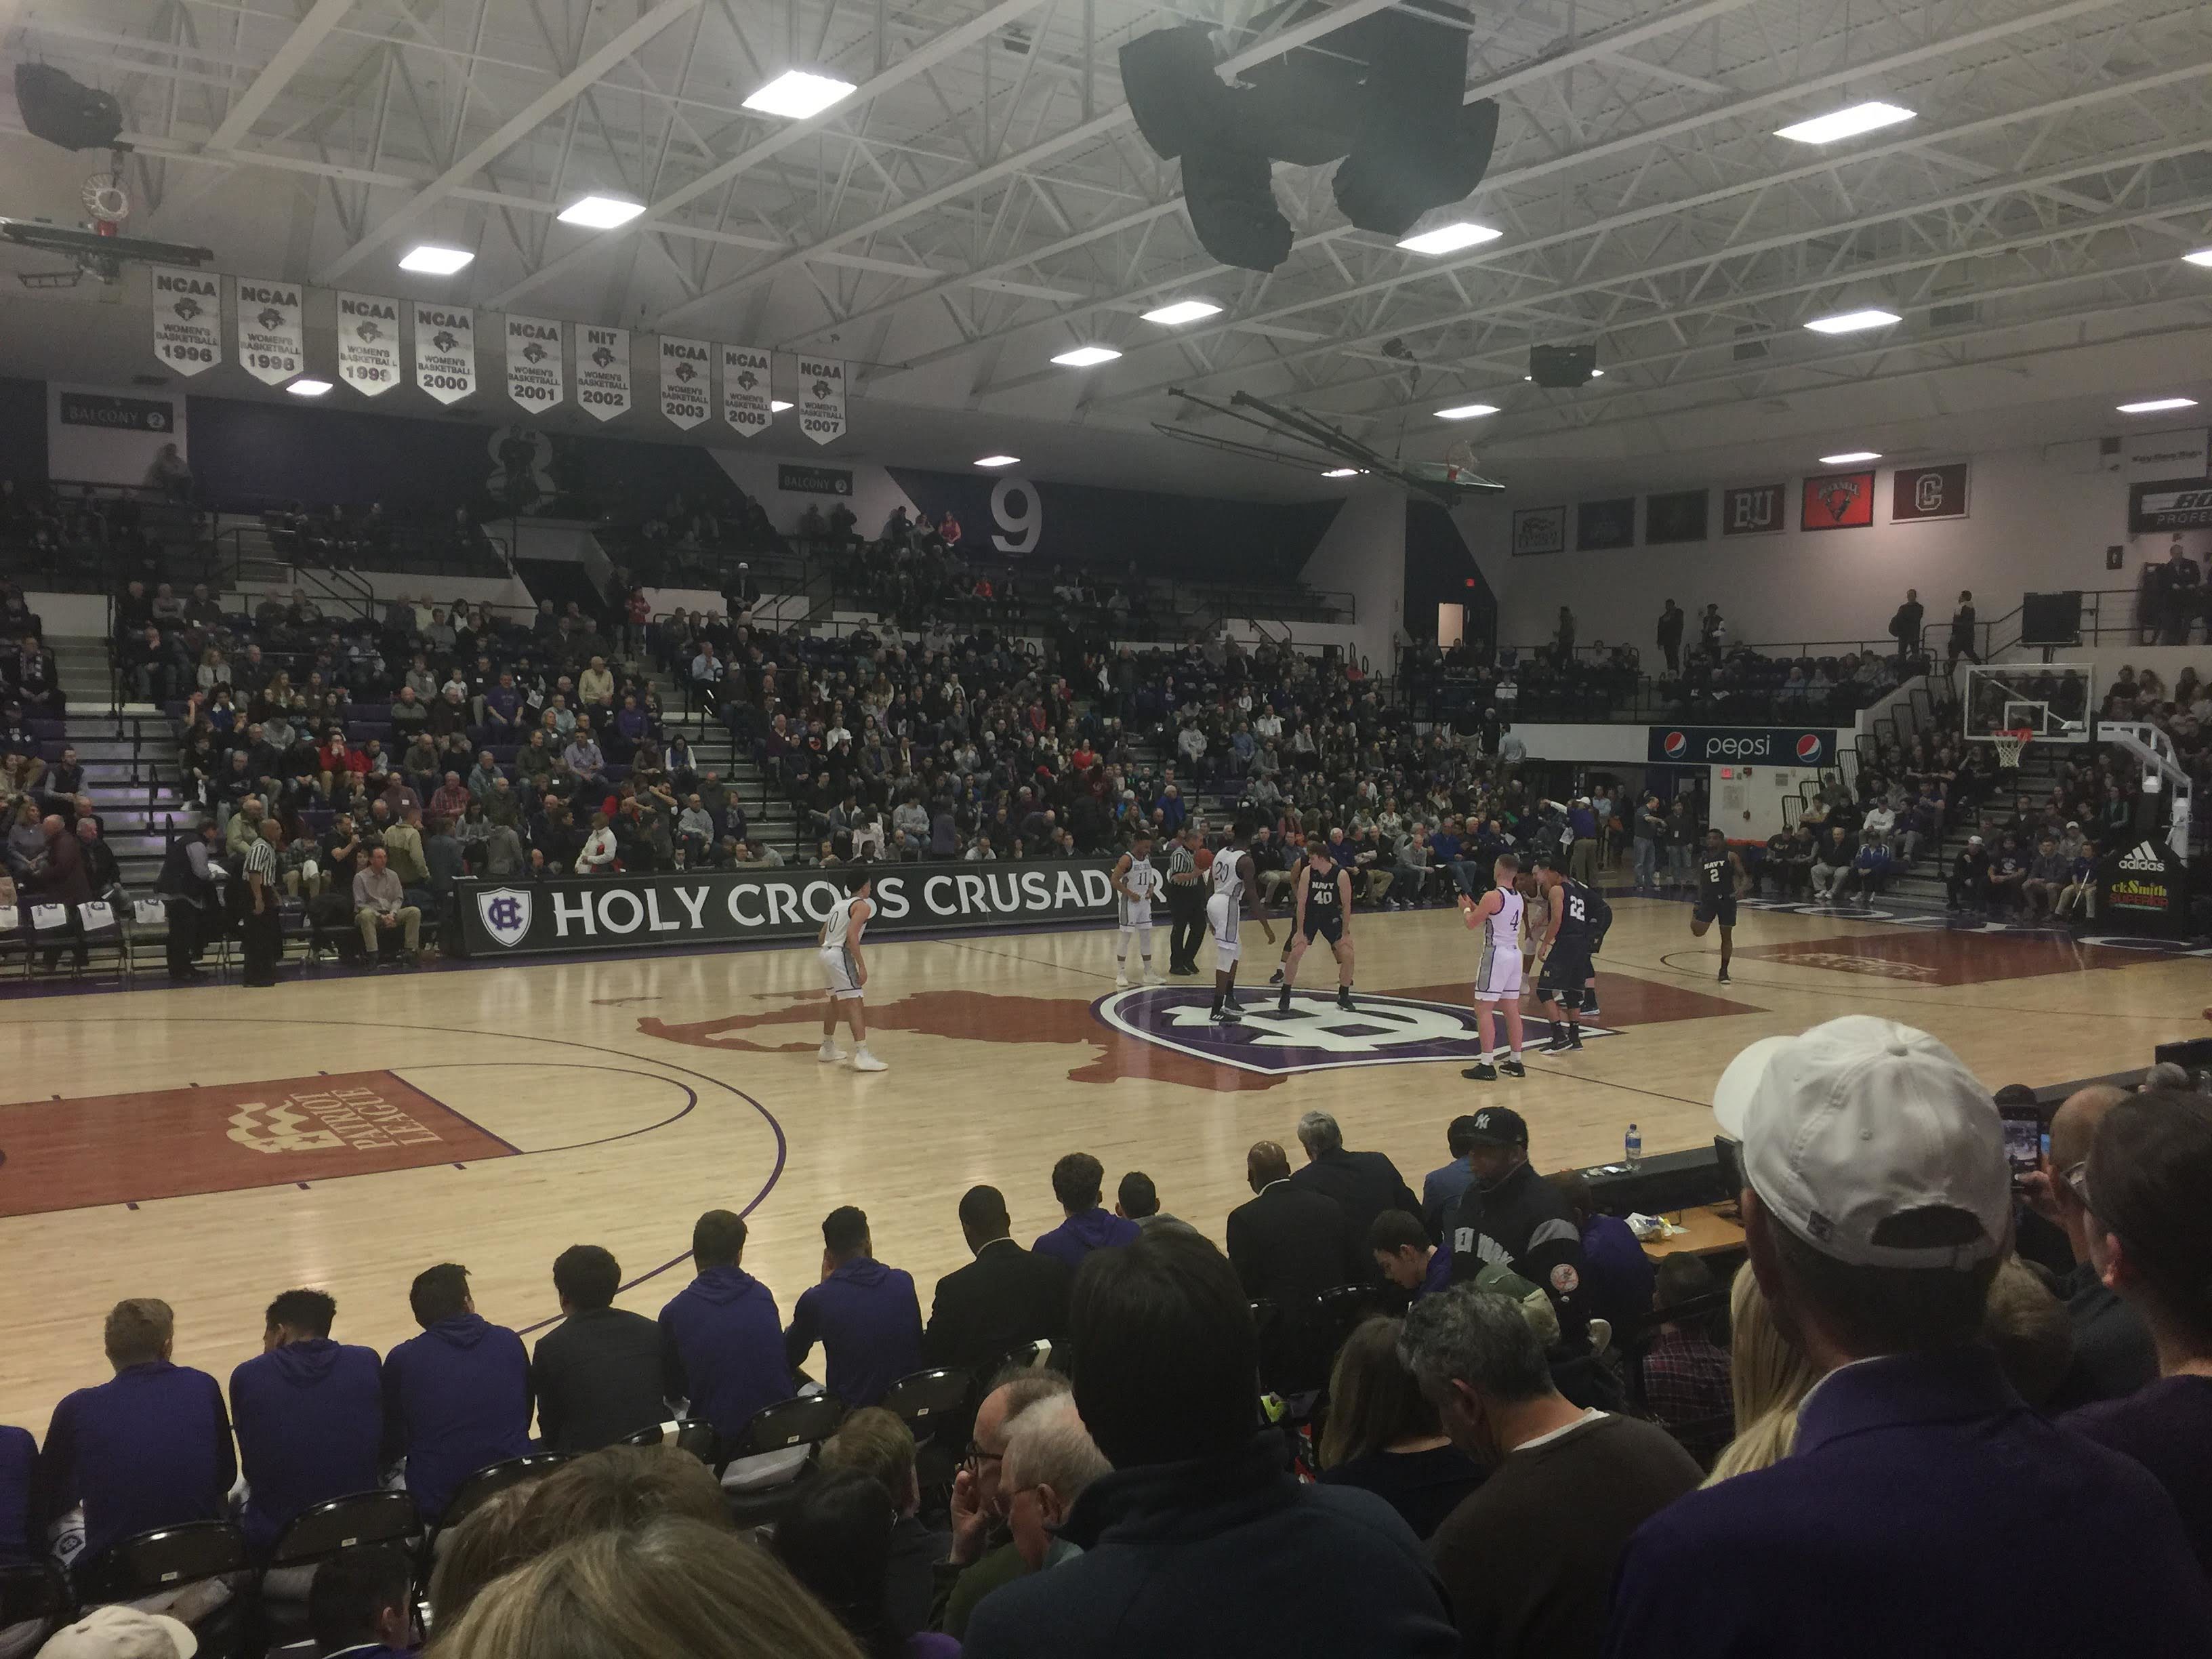 A view from the stands of Holy Cross and Navy basketball players preparing for tipoff.